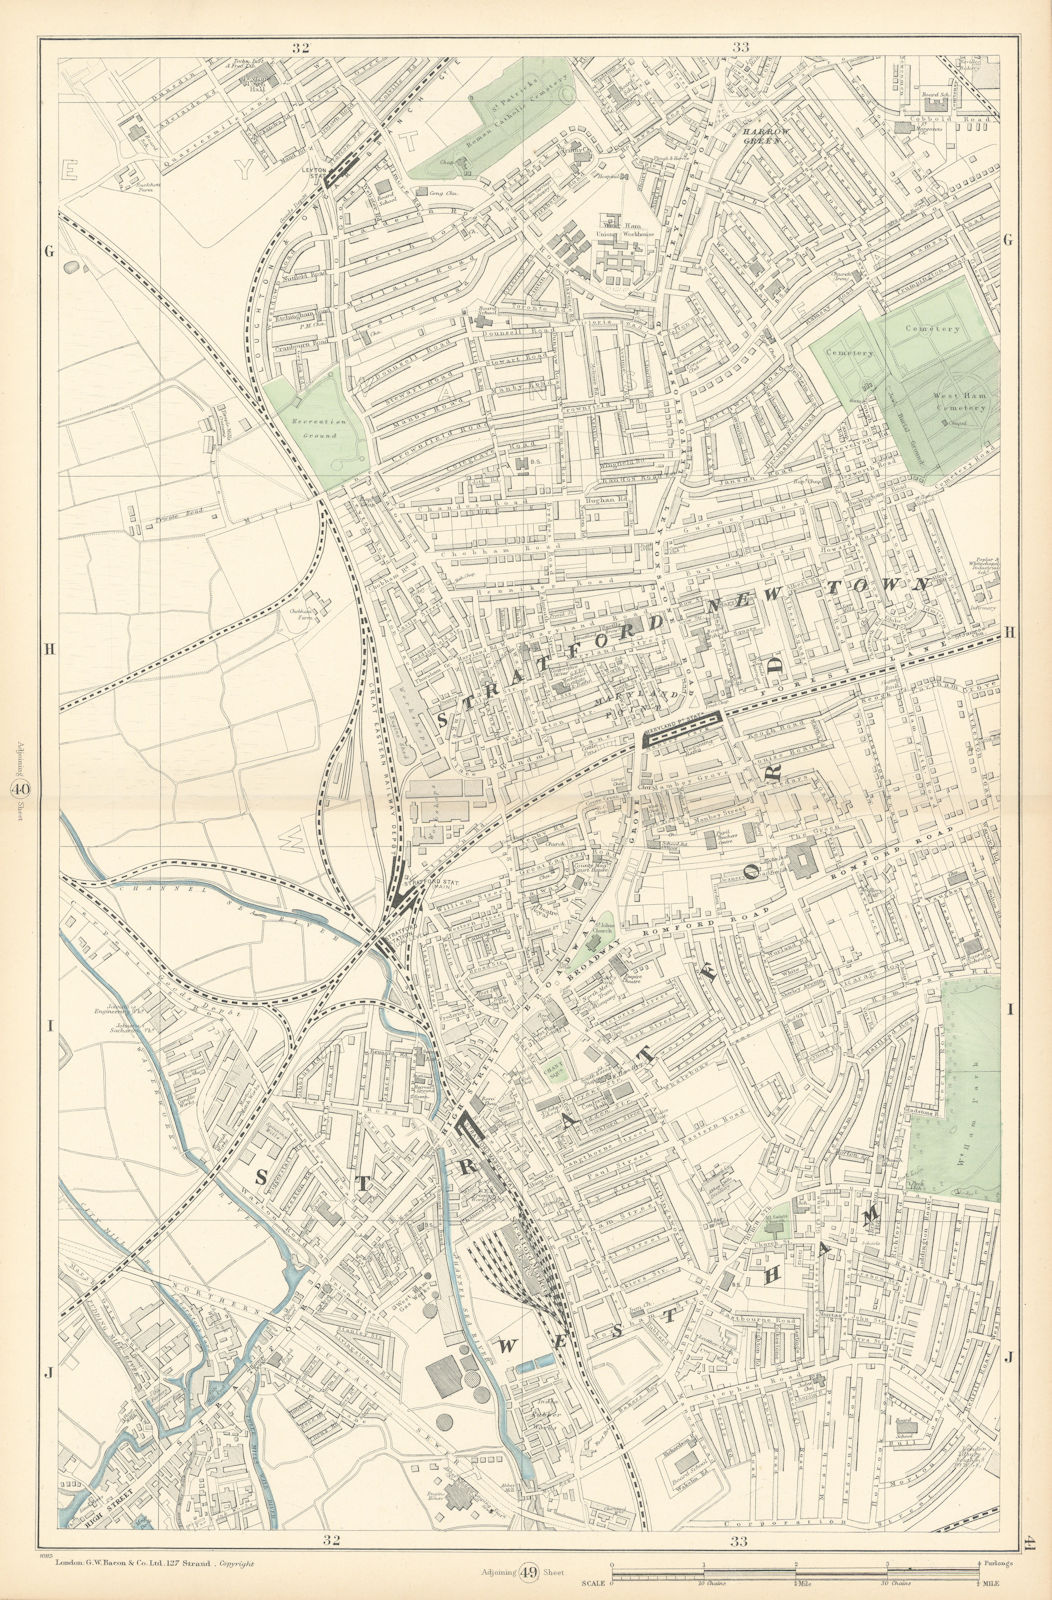 EAST LONDON Stratford New Town West Ham Leyton Maryland. Westfield site 1900 map